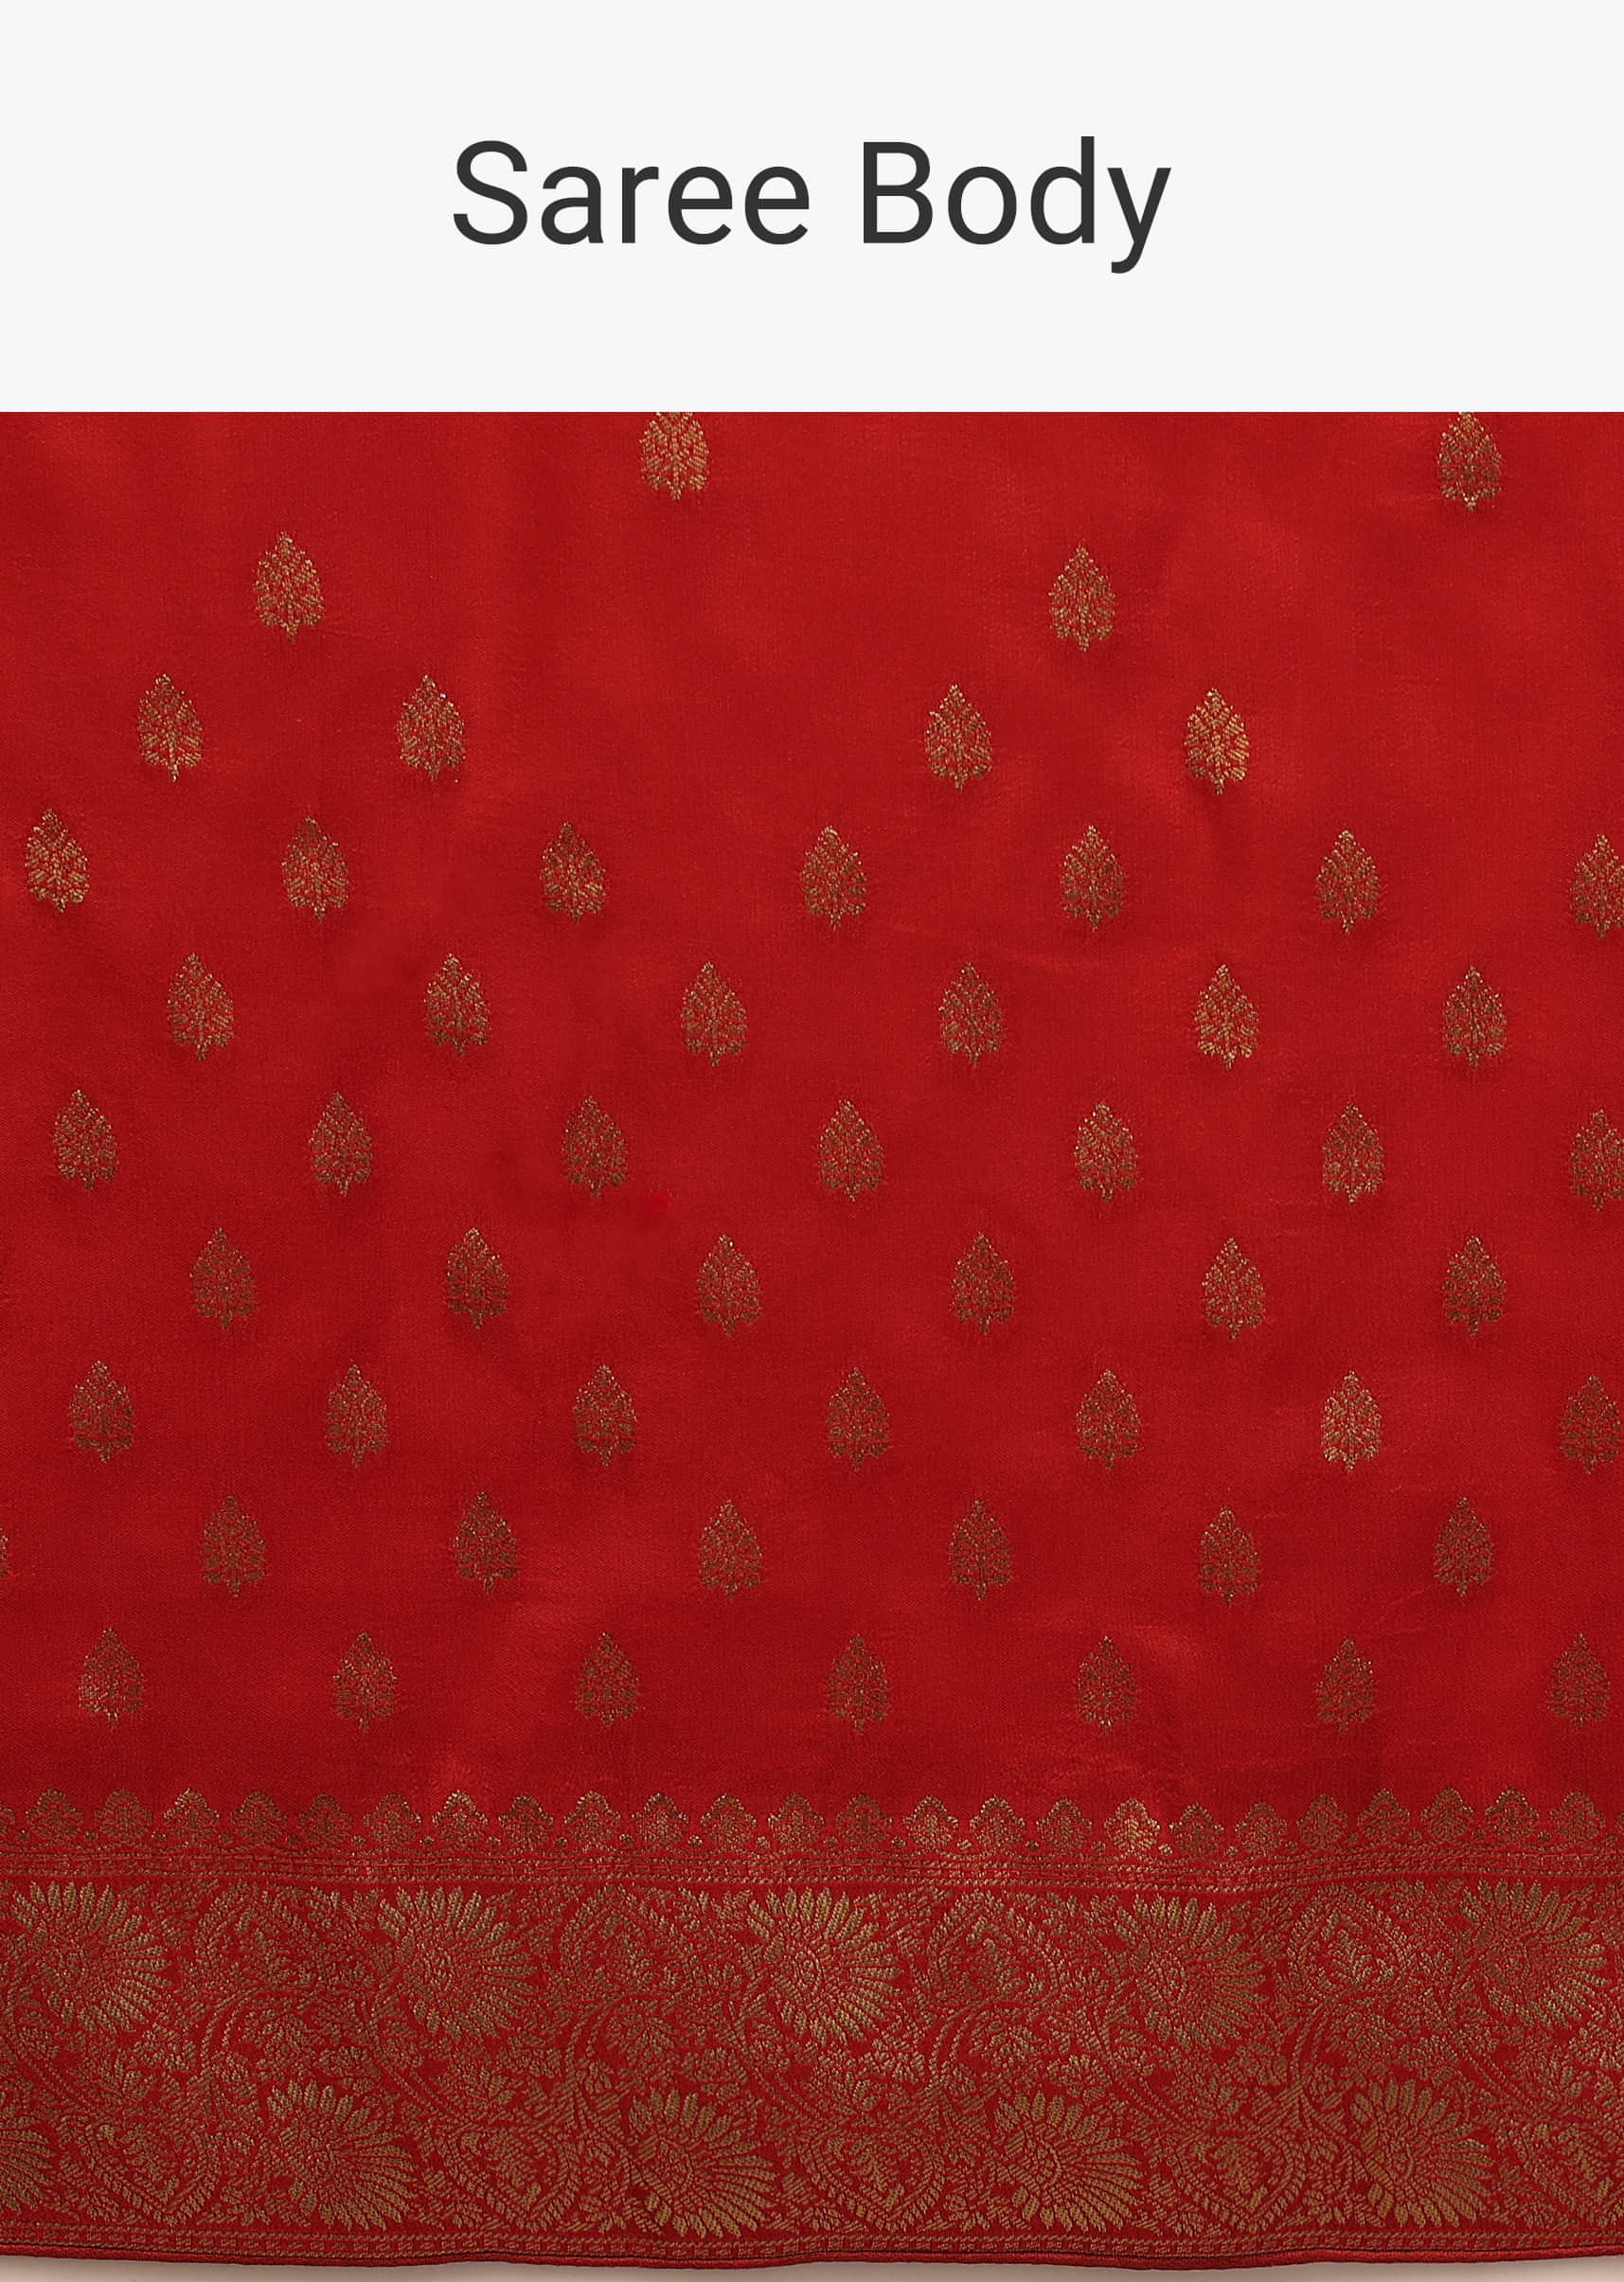 Fiery Red Saree In Dola Silk With Woven Leaf Buttis And Moroccan Weave On Pallu